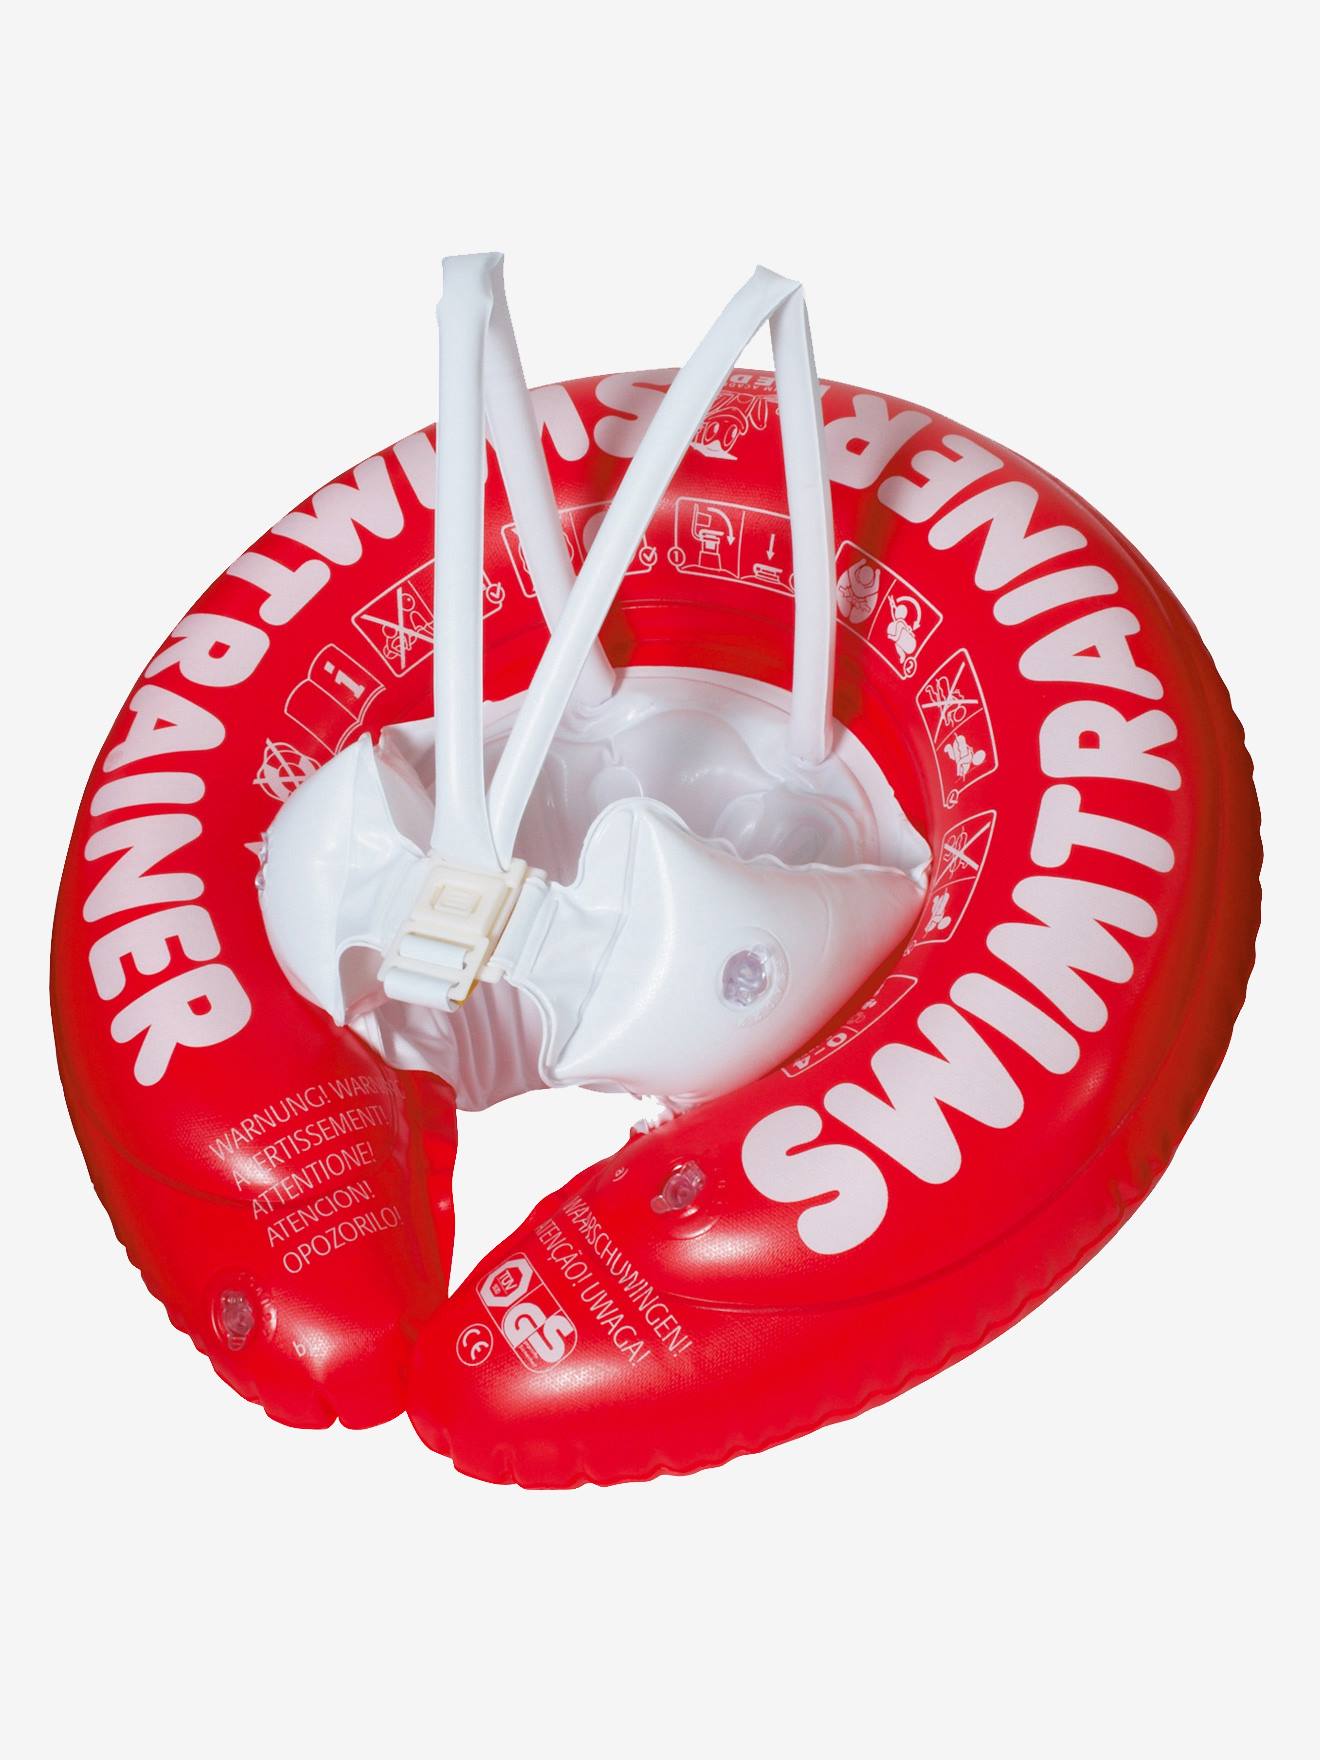 Bouee Swimtrainer Fred Swim Academy Rouge 3 Mois 4 Ans Fred Swim Academy